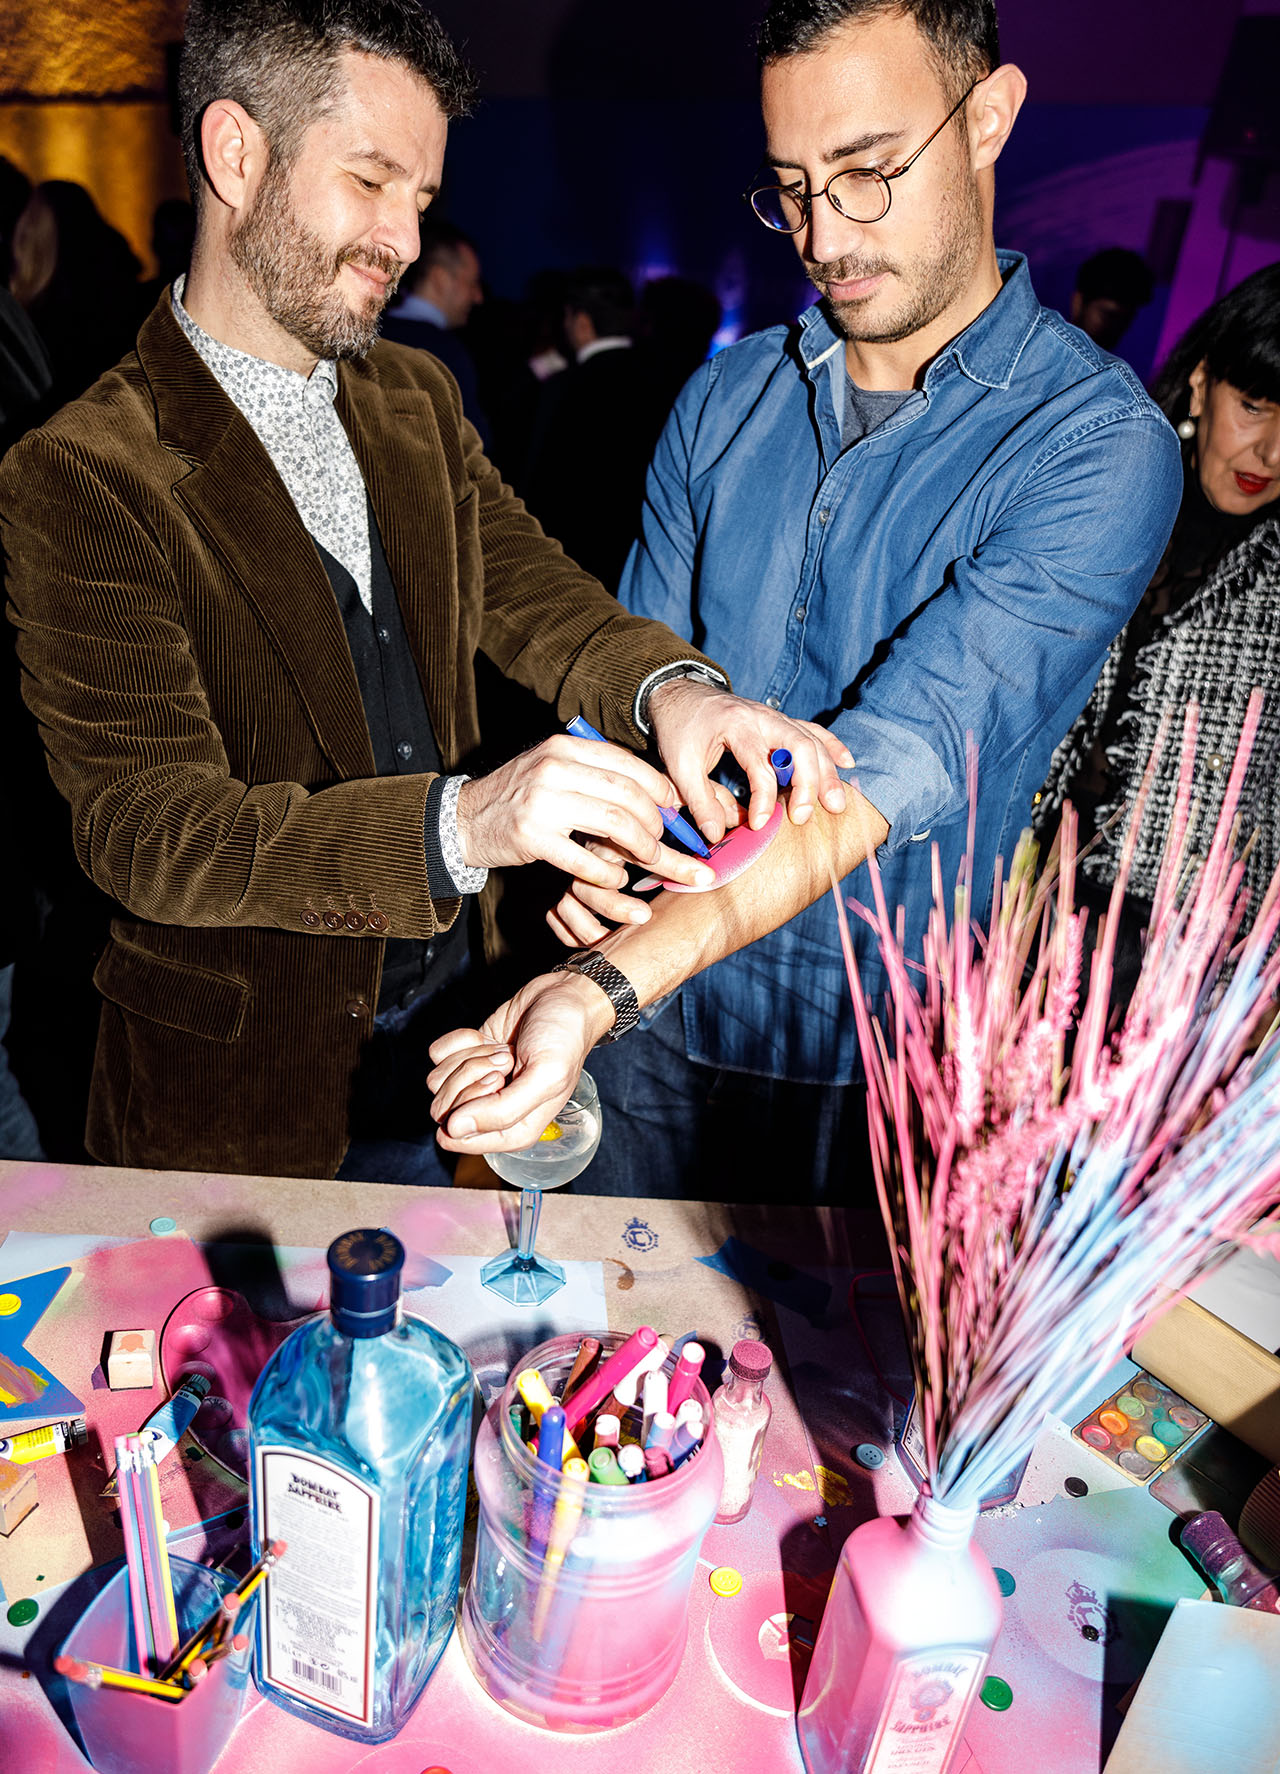 Art supplies allowed guests to create their own Bombay Sapphire-inspired artworks. Photo by Spyros Chamalis © Yatzer 2019.